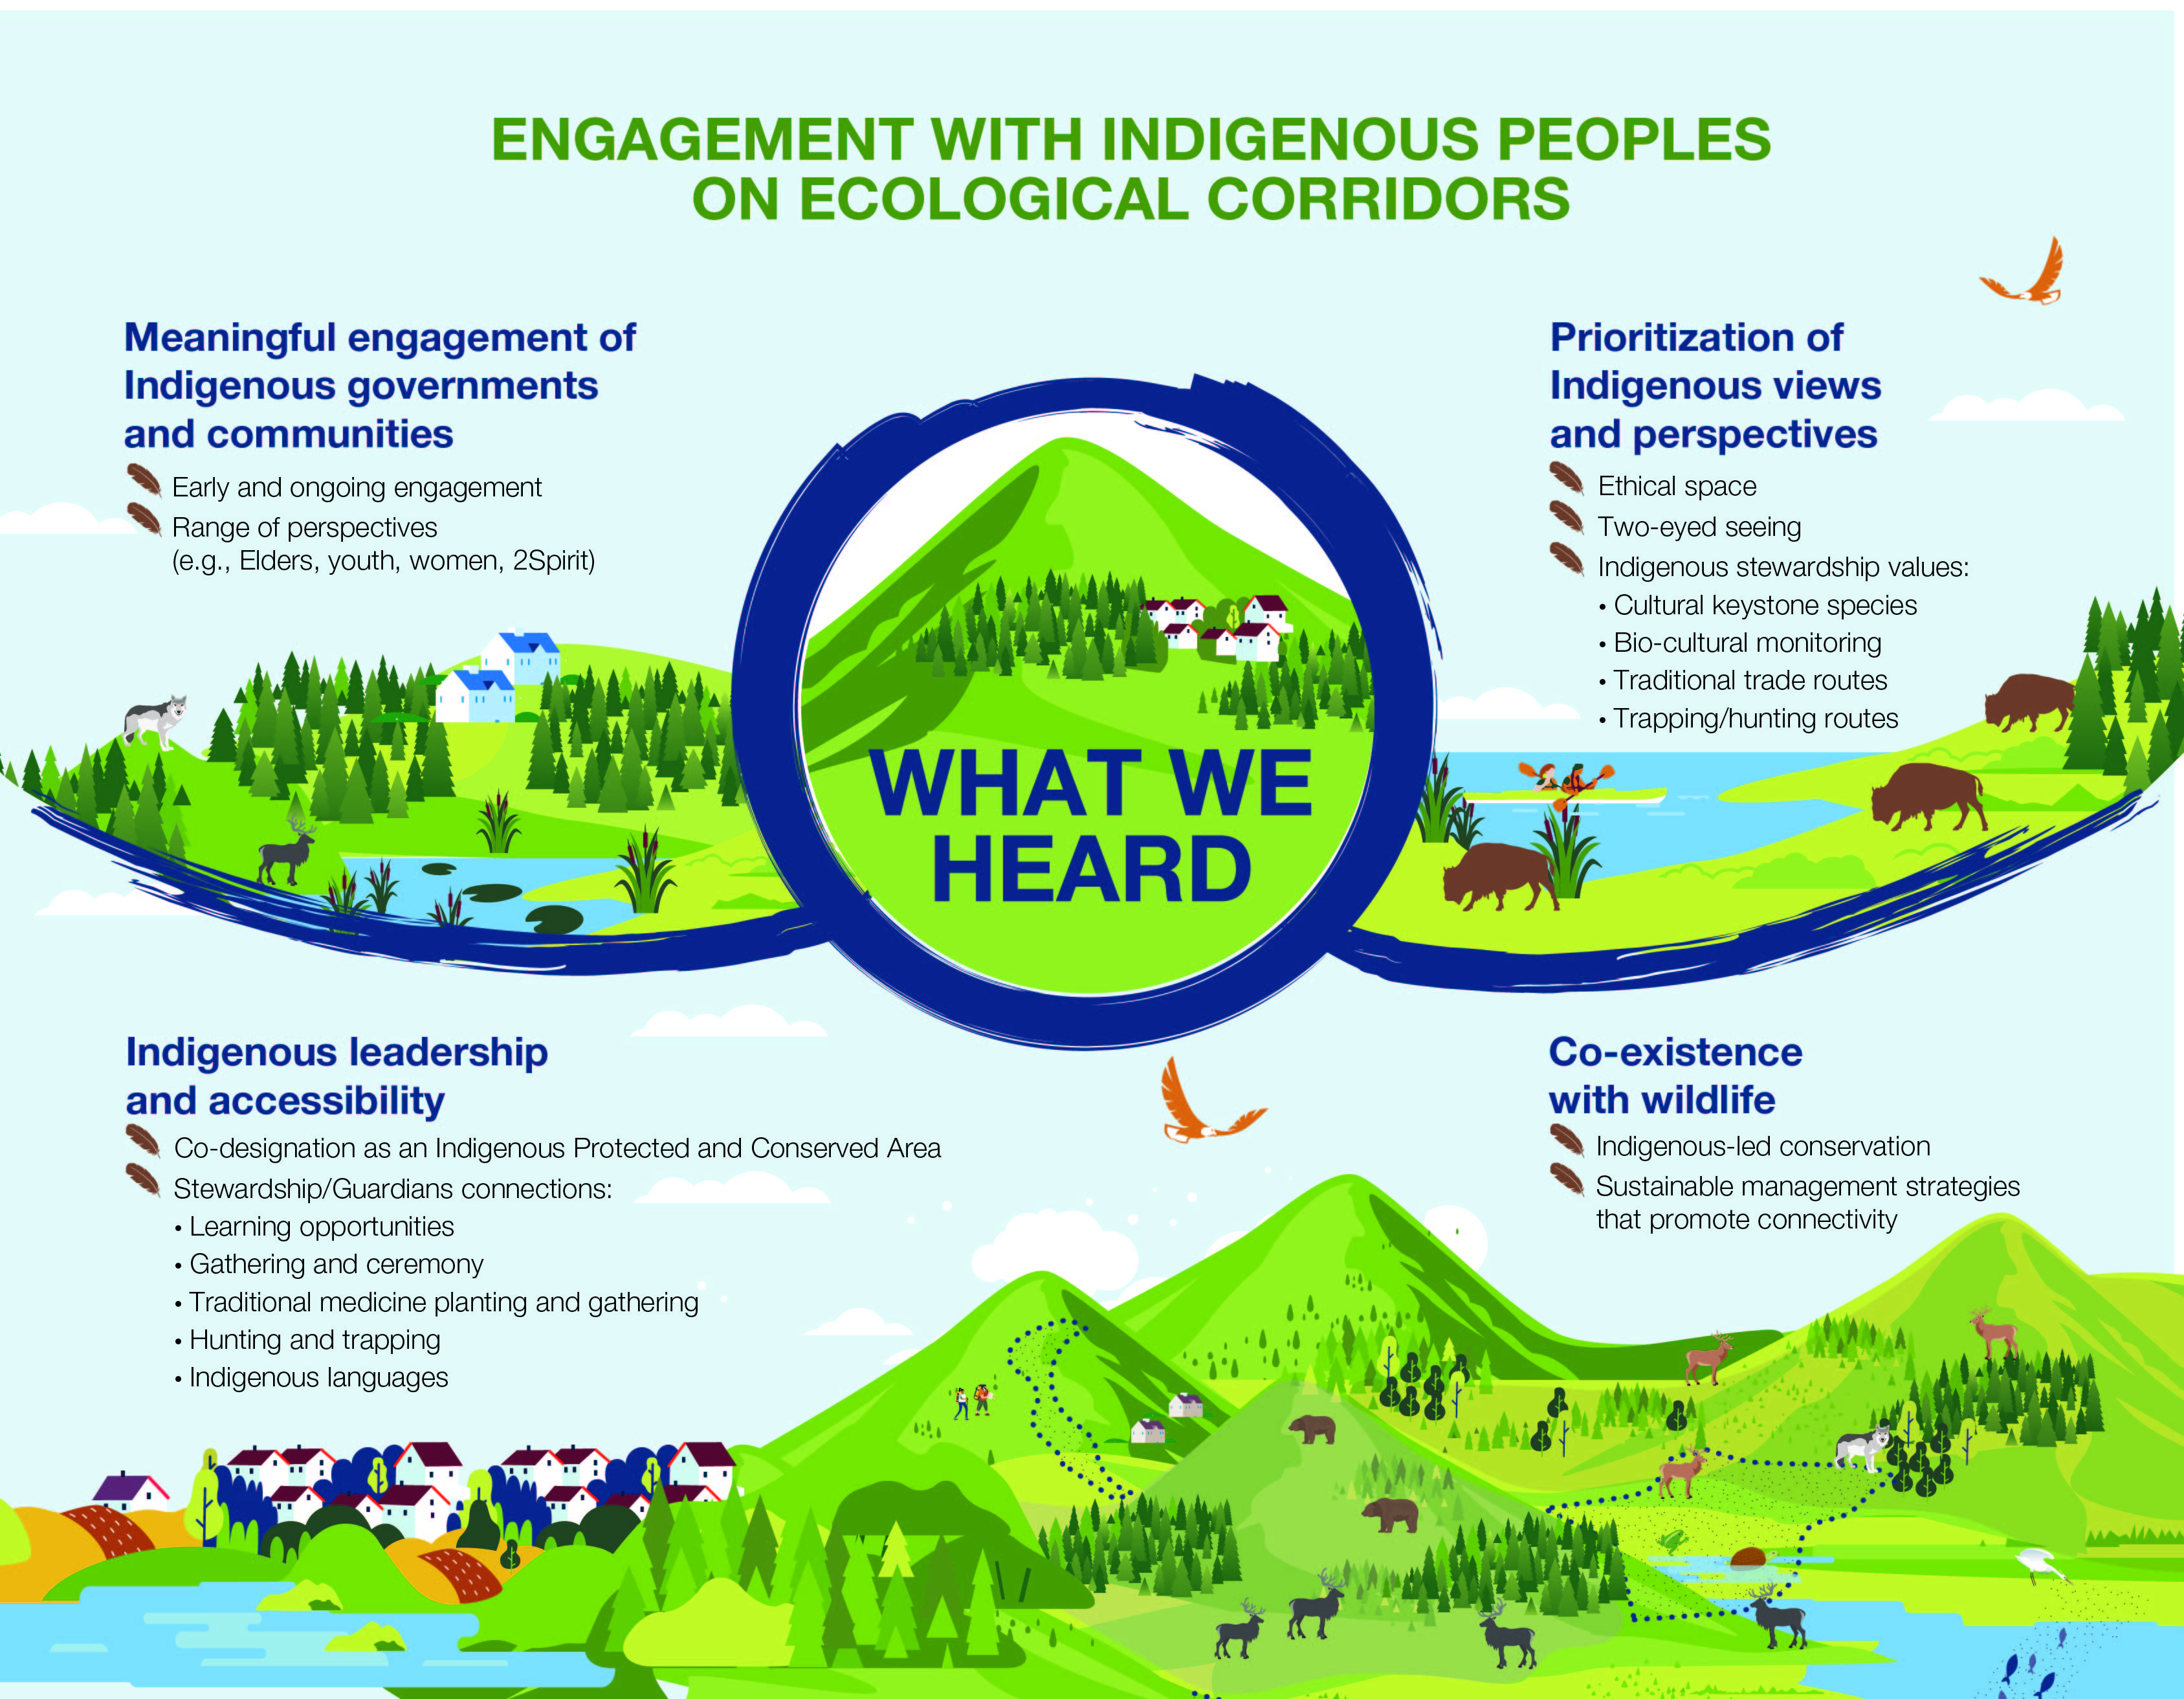 A graphic illustrating what was heard through engagement with Indigenous peoples on ecological corridors